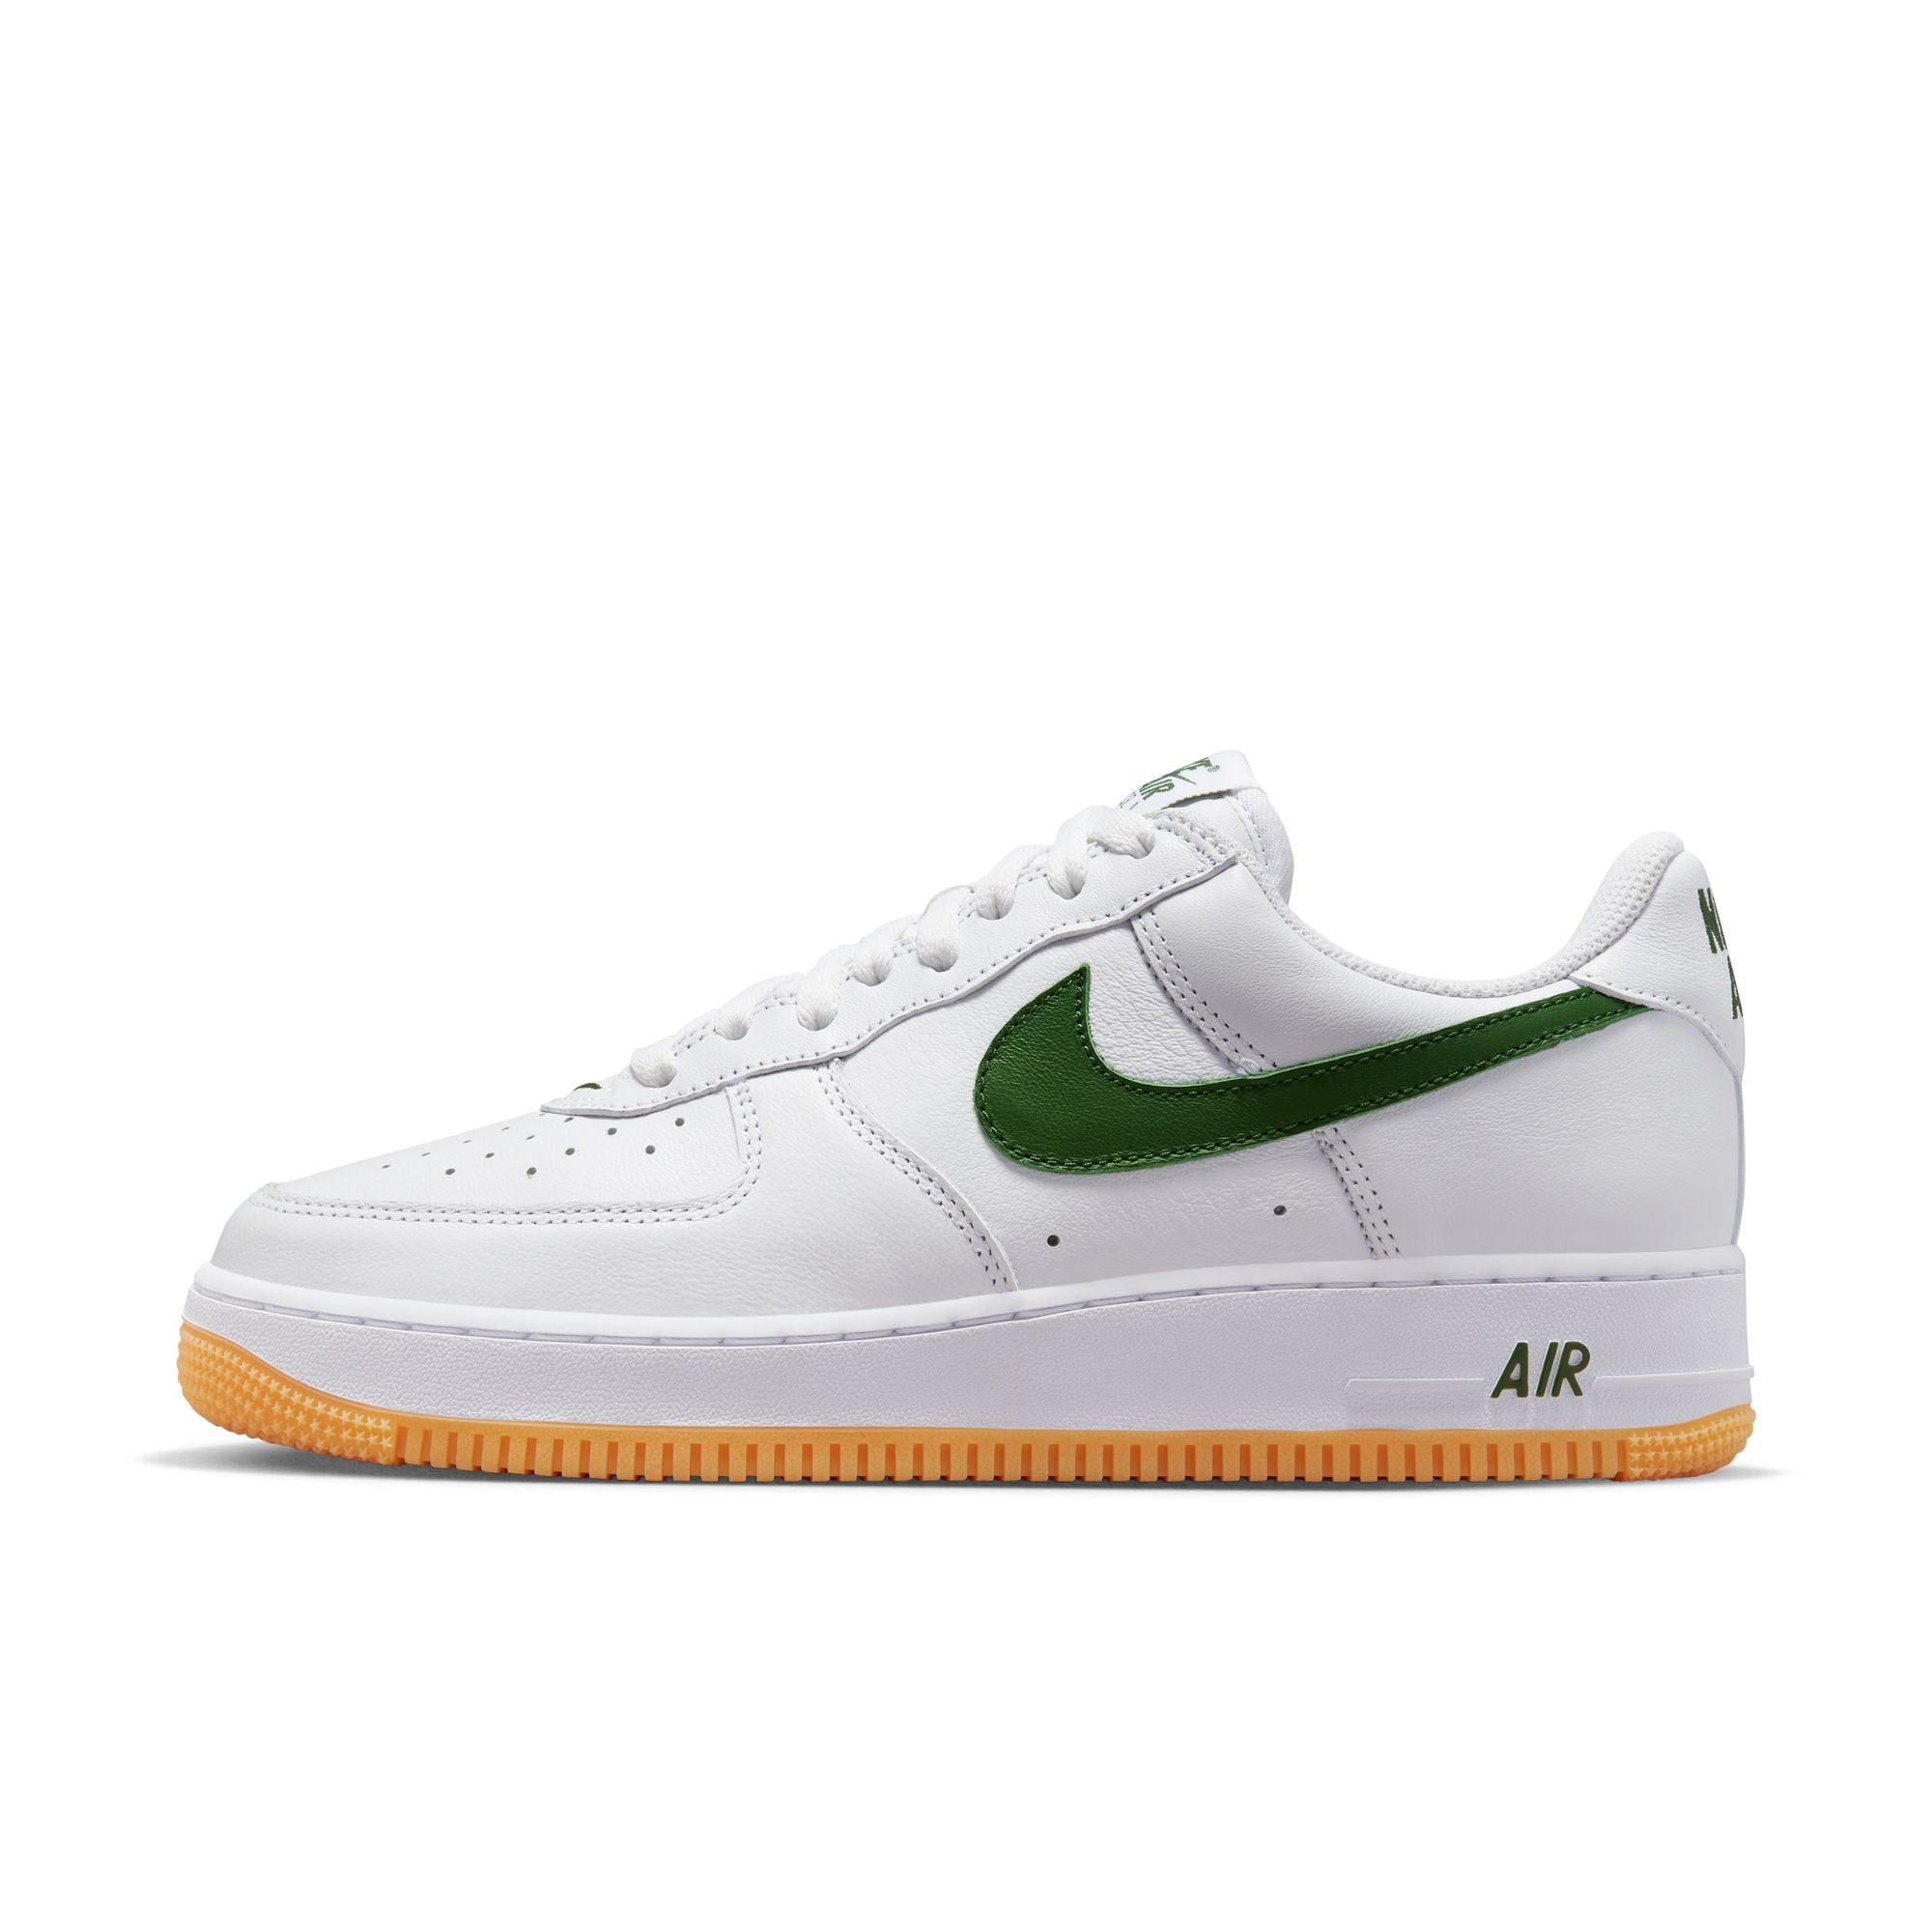 NIKE - Air Force 1 Low Retro Qs - (White/Forest Green-Gum Yellow) view 5